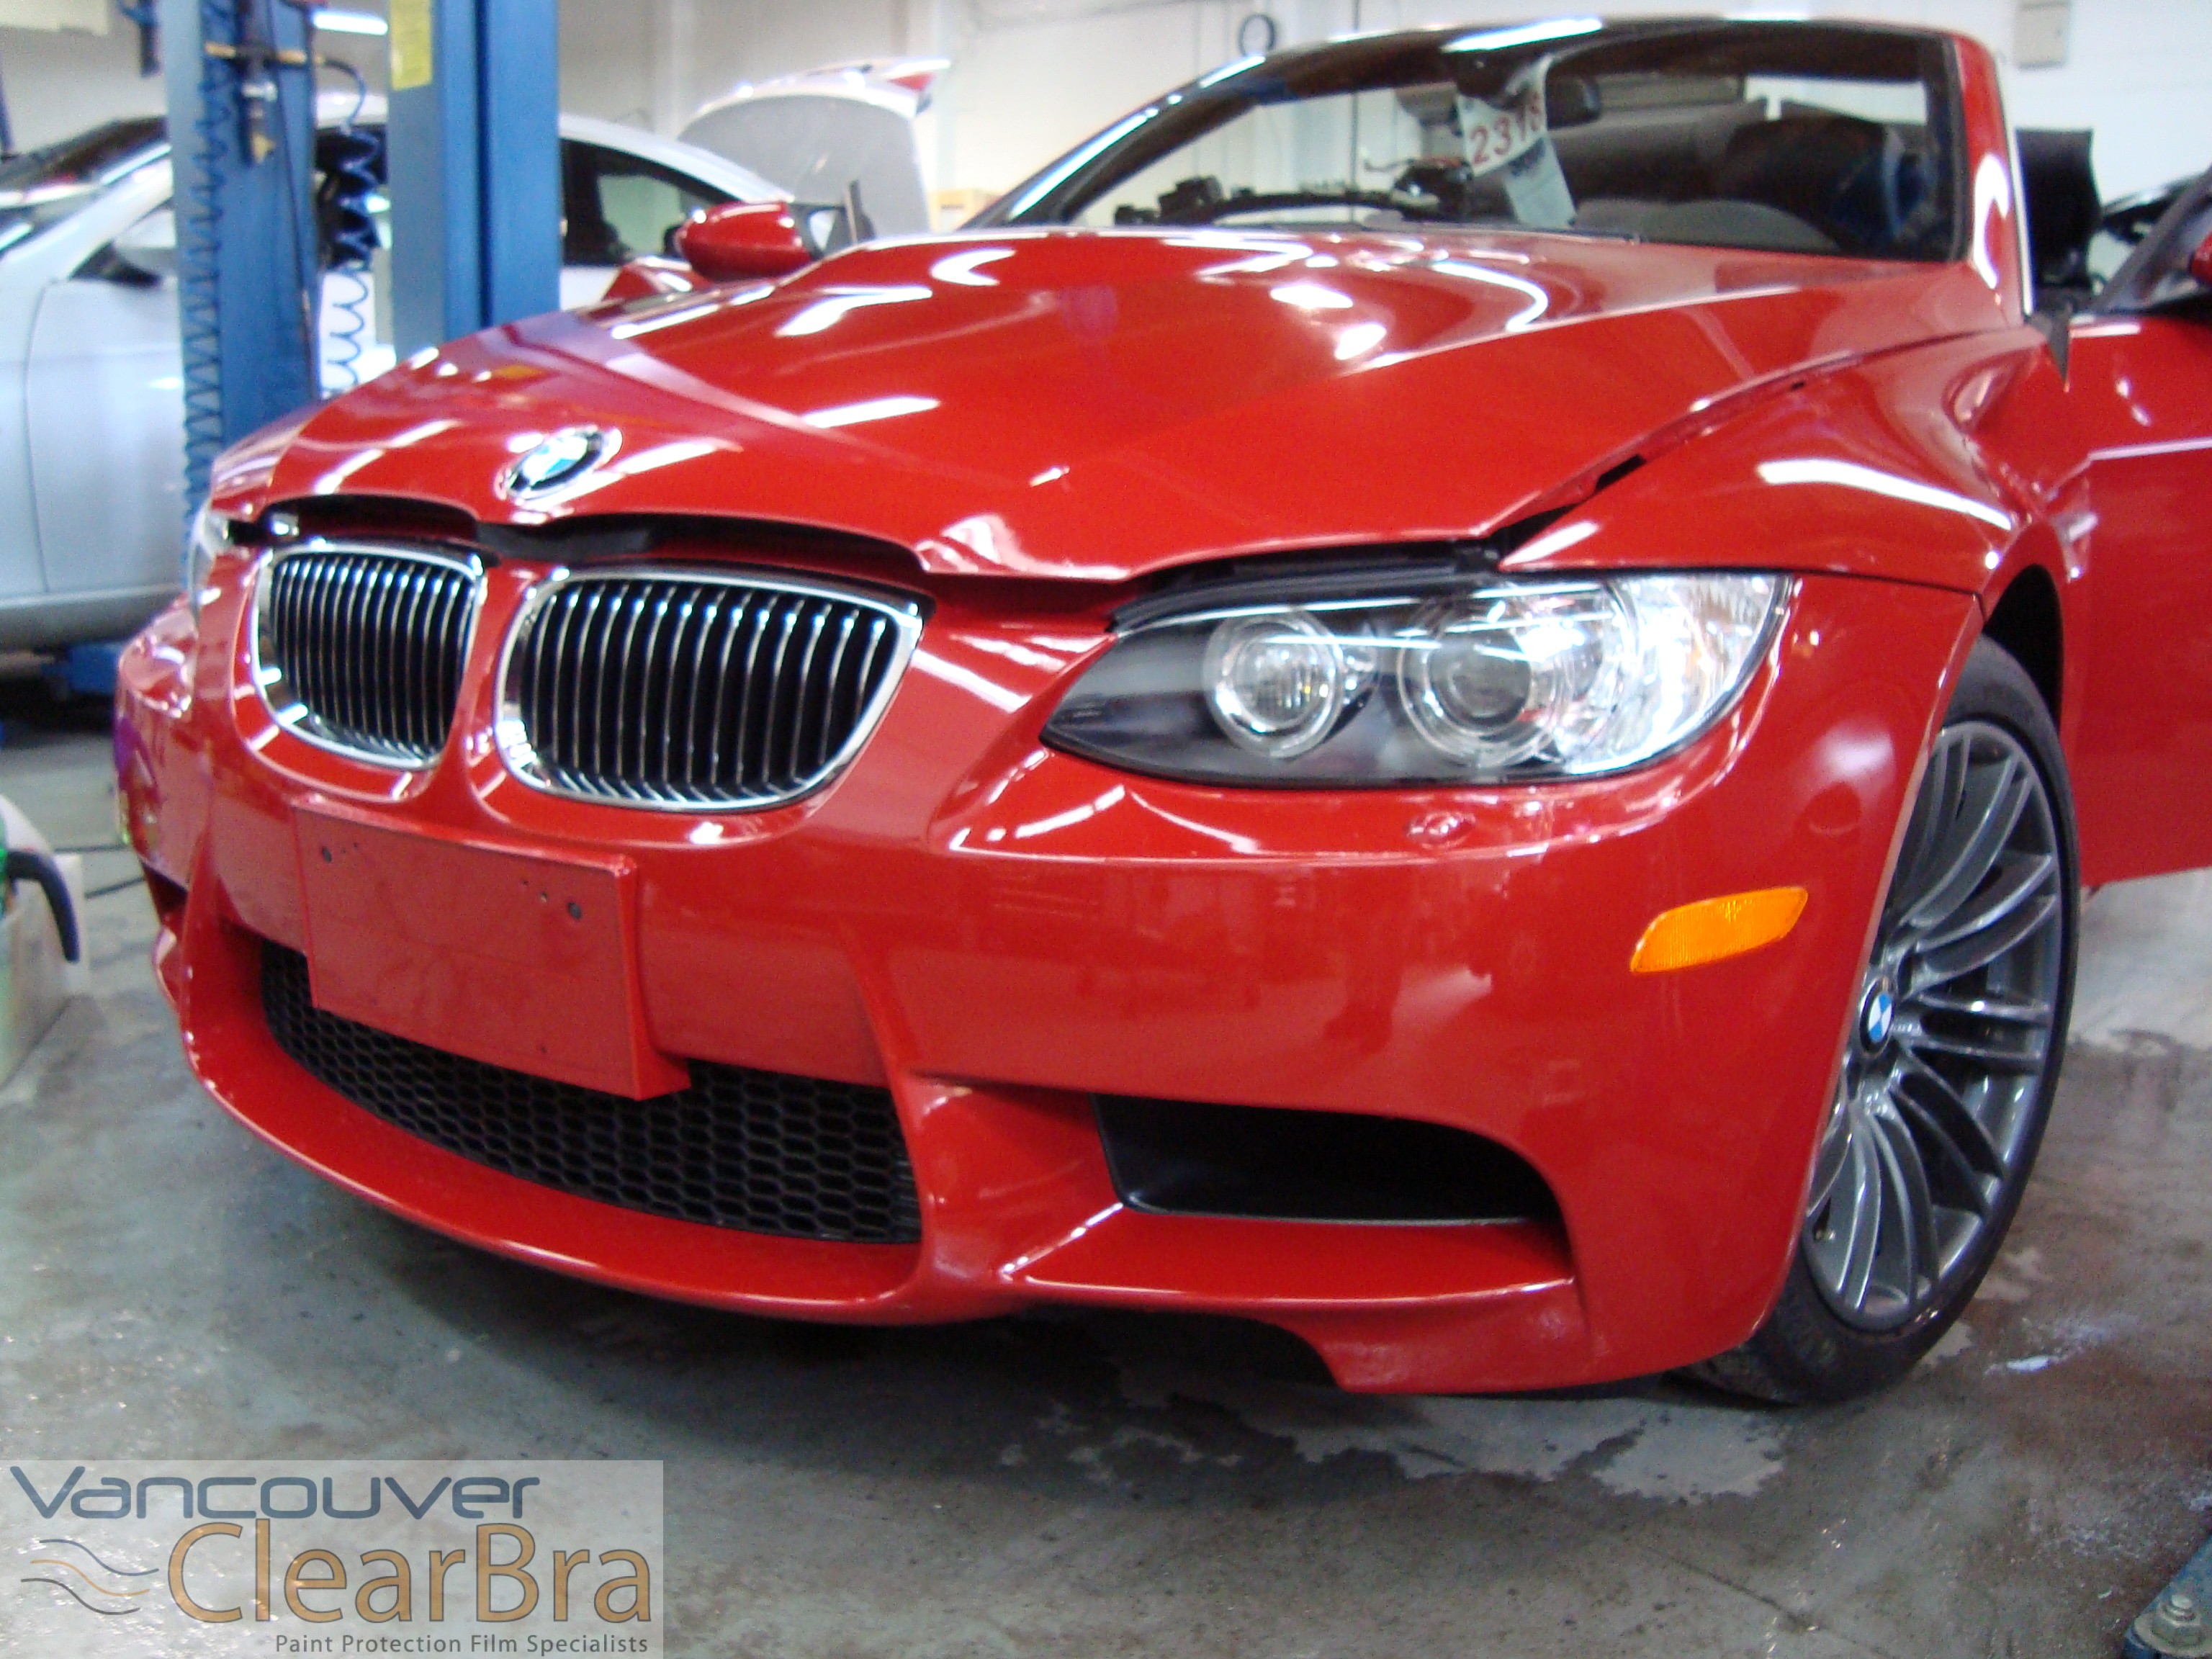 Clear Bra Paint Protection Film Archives - Vancouver ClearBra